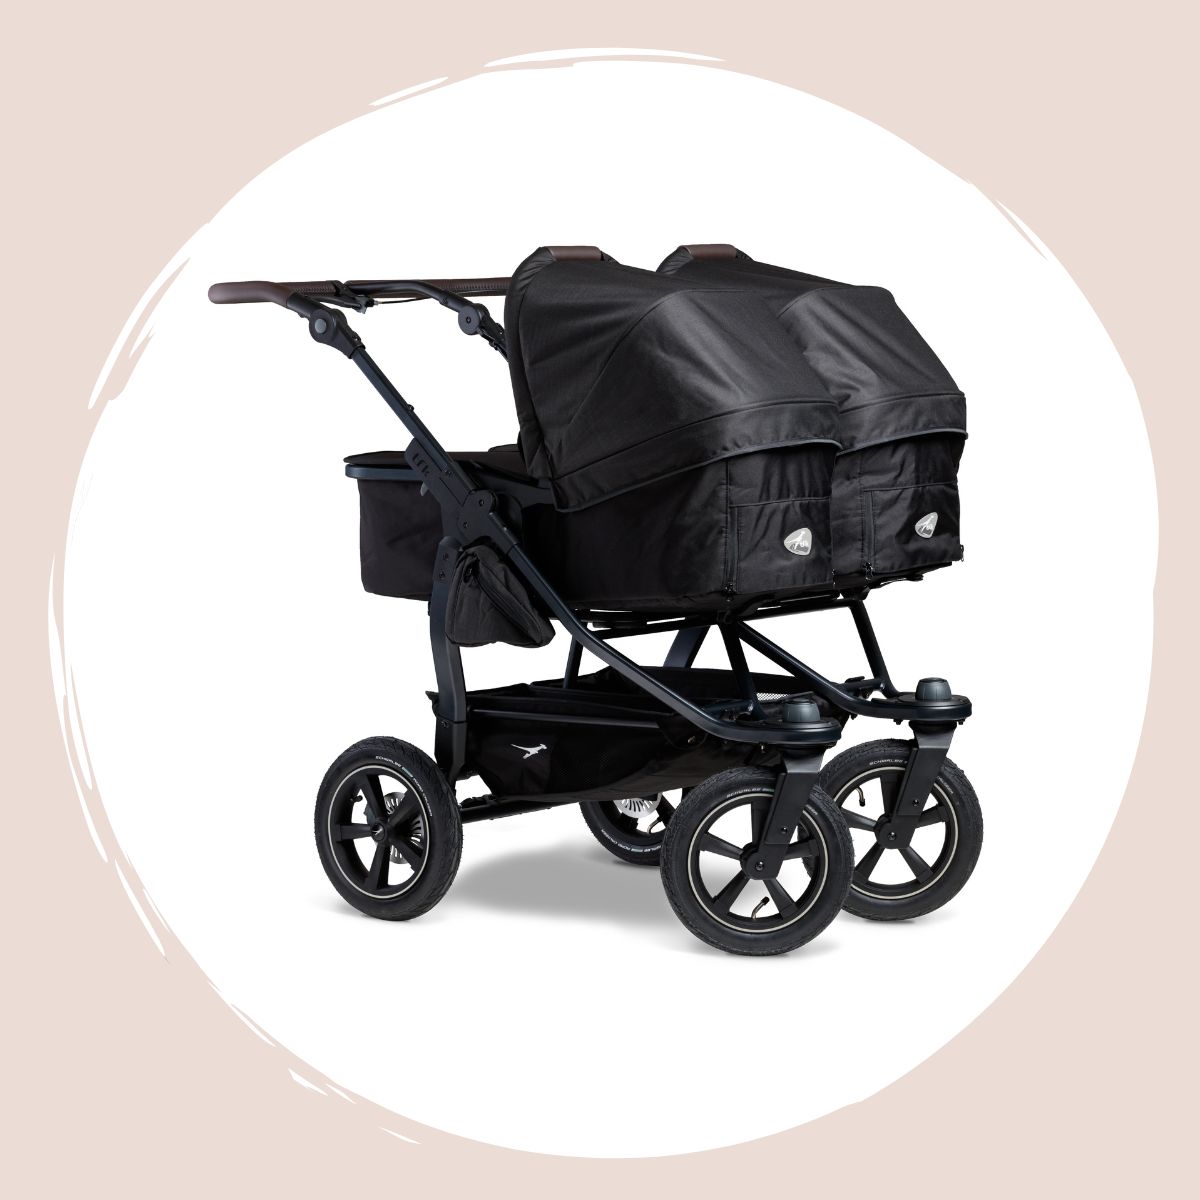 TFK Duo 2 stroller and accessories